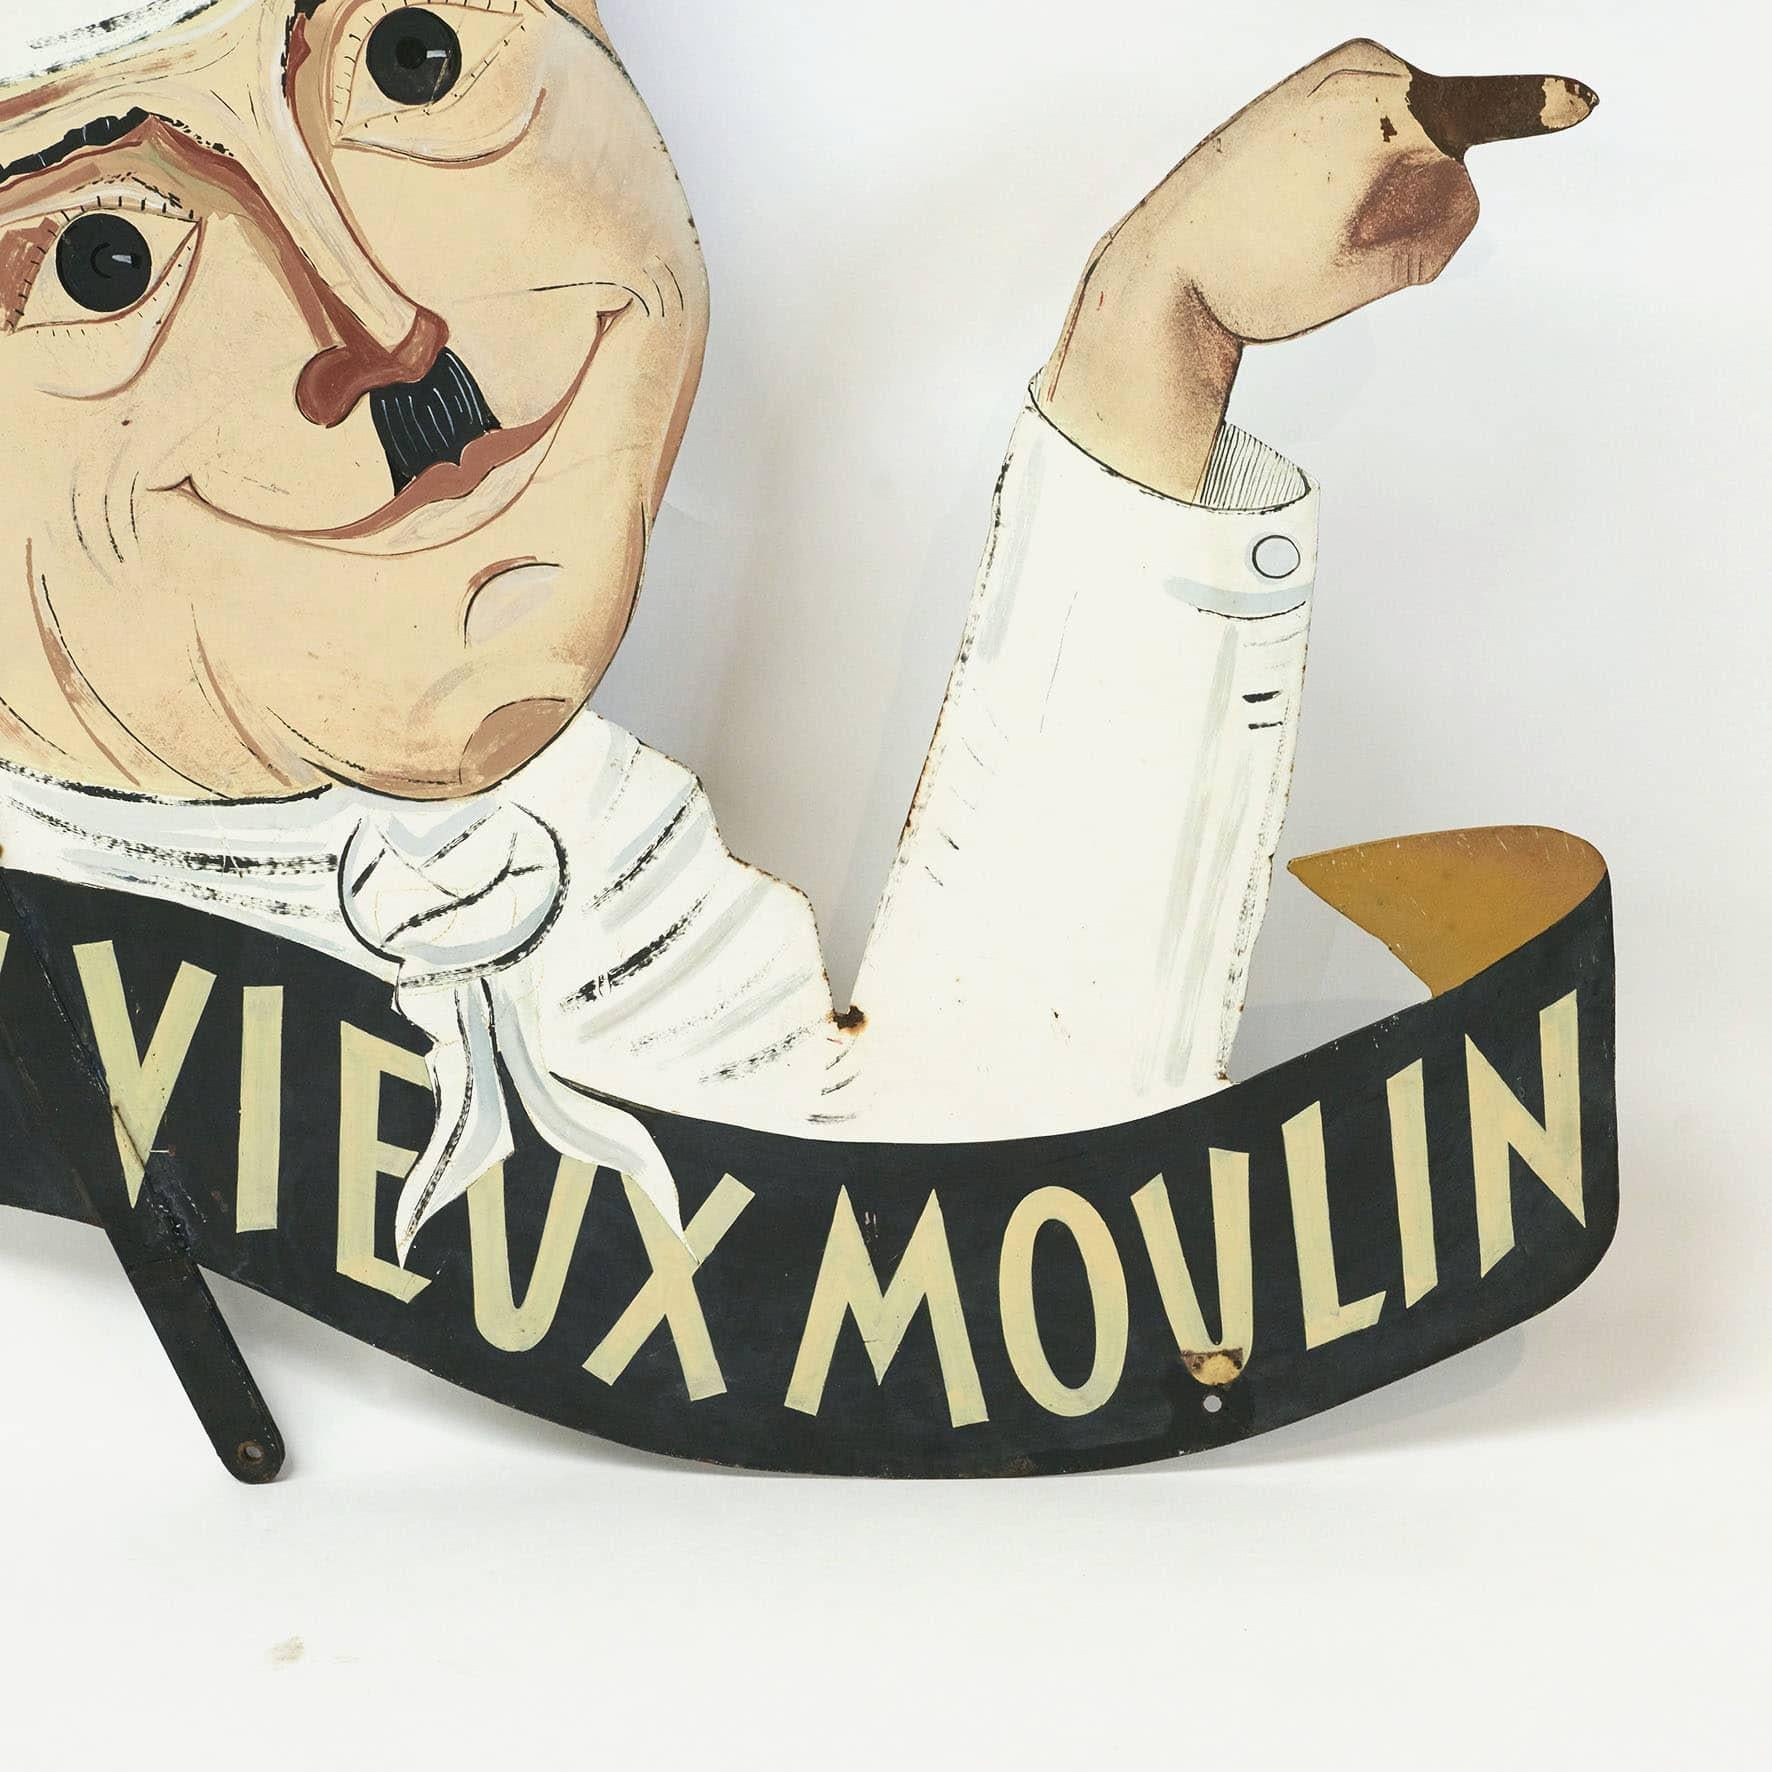 20th Century Vintage French Restaurant Sign, Painted Metal, France, C. 1920 For Sale